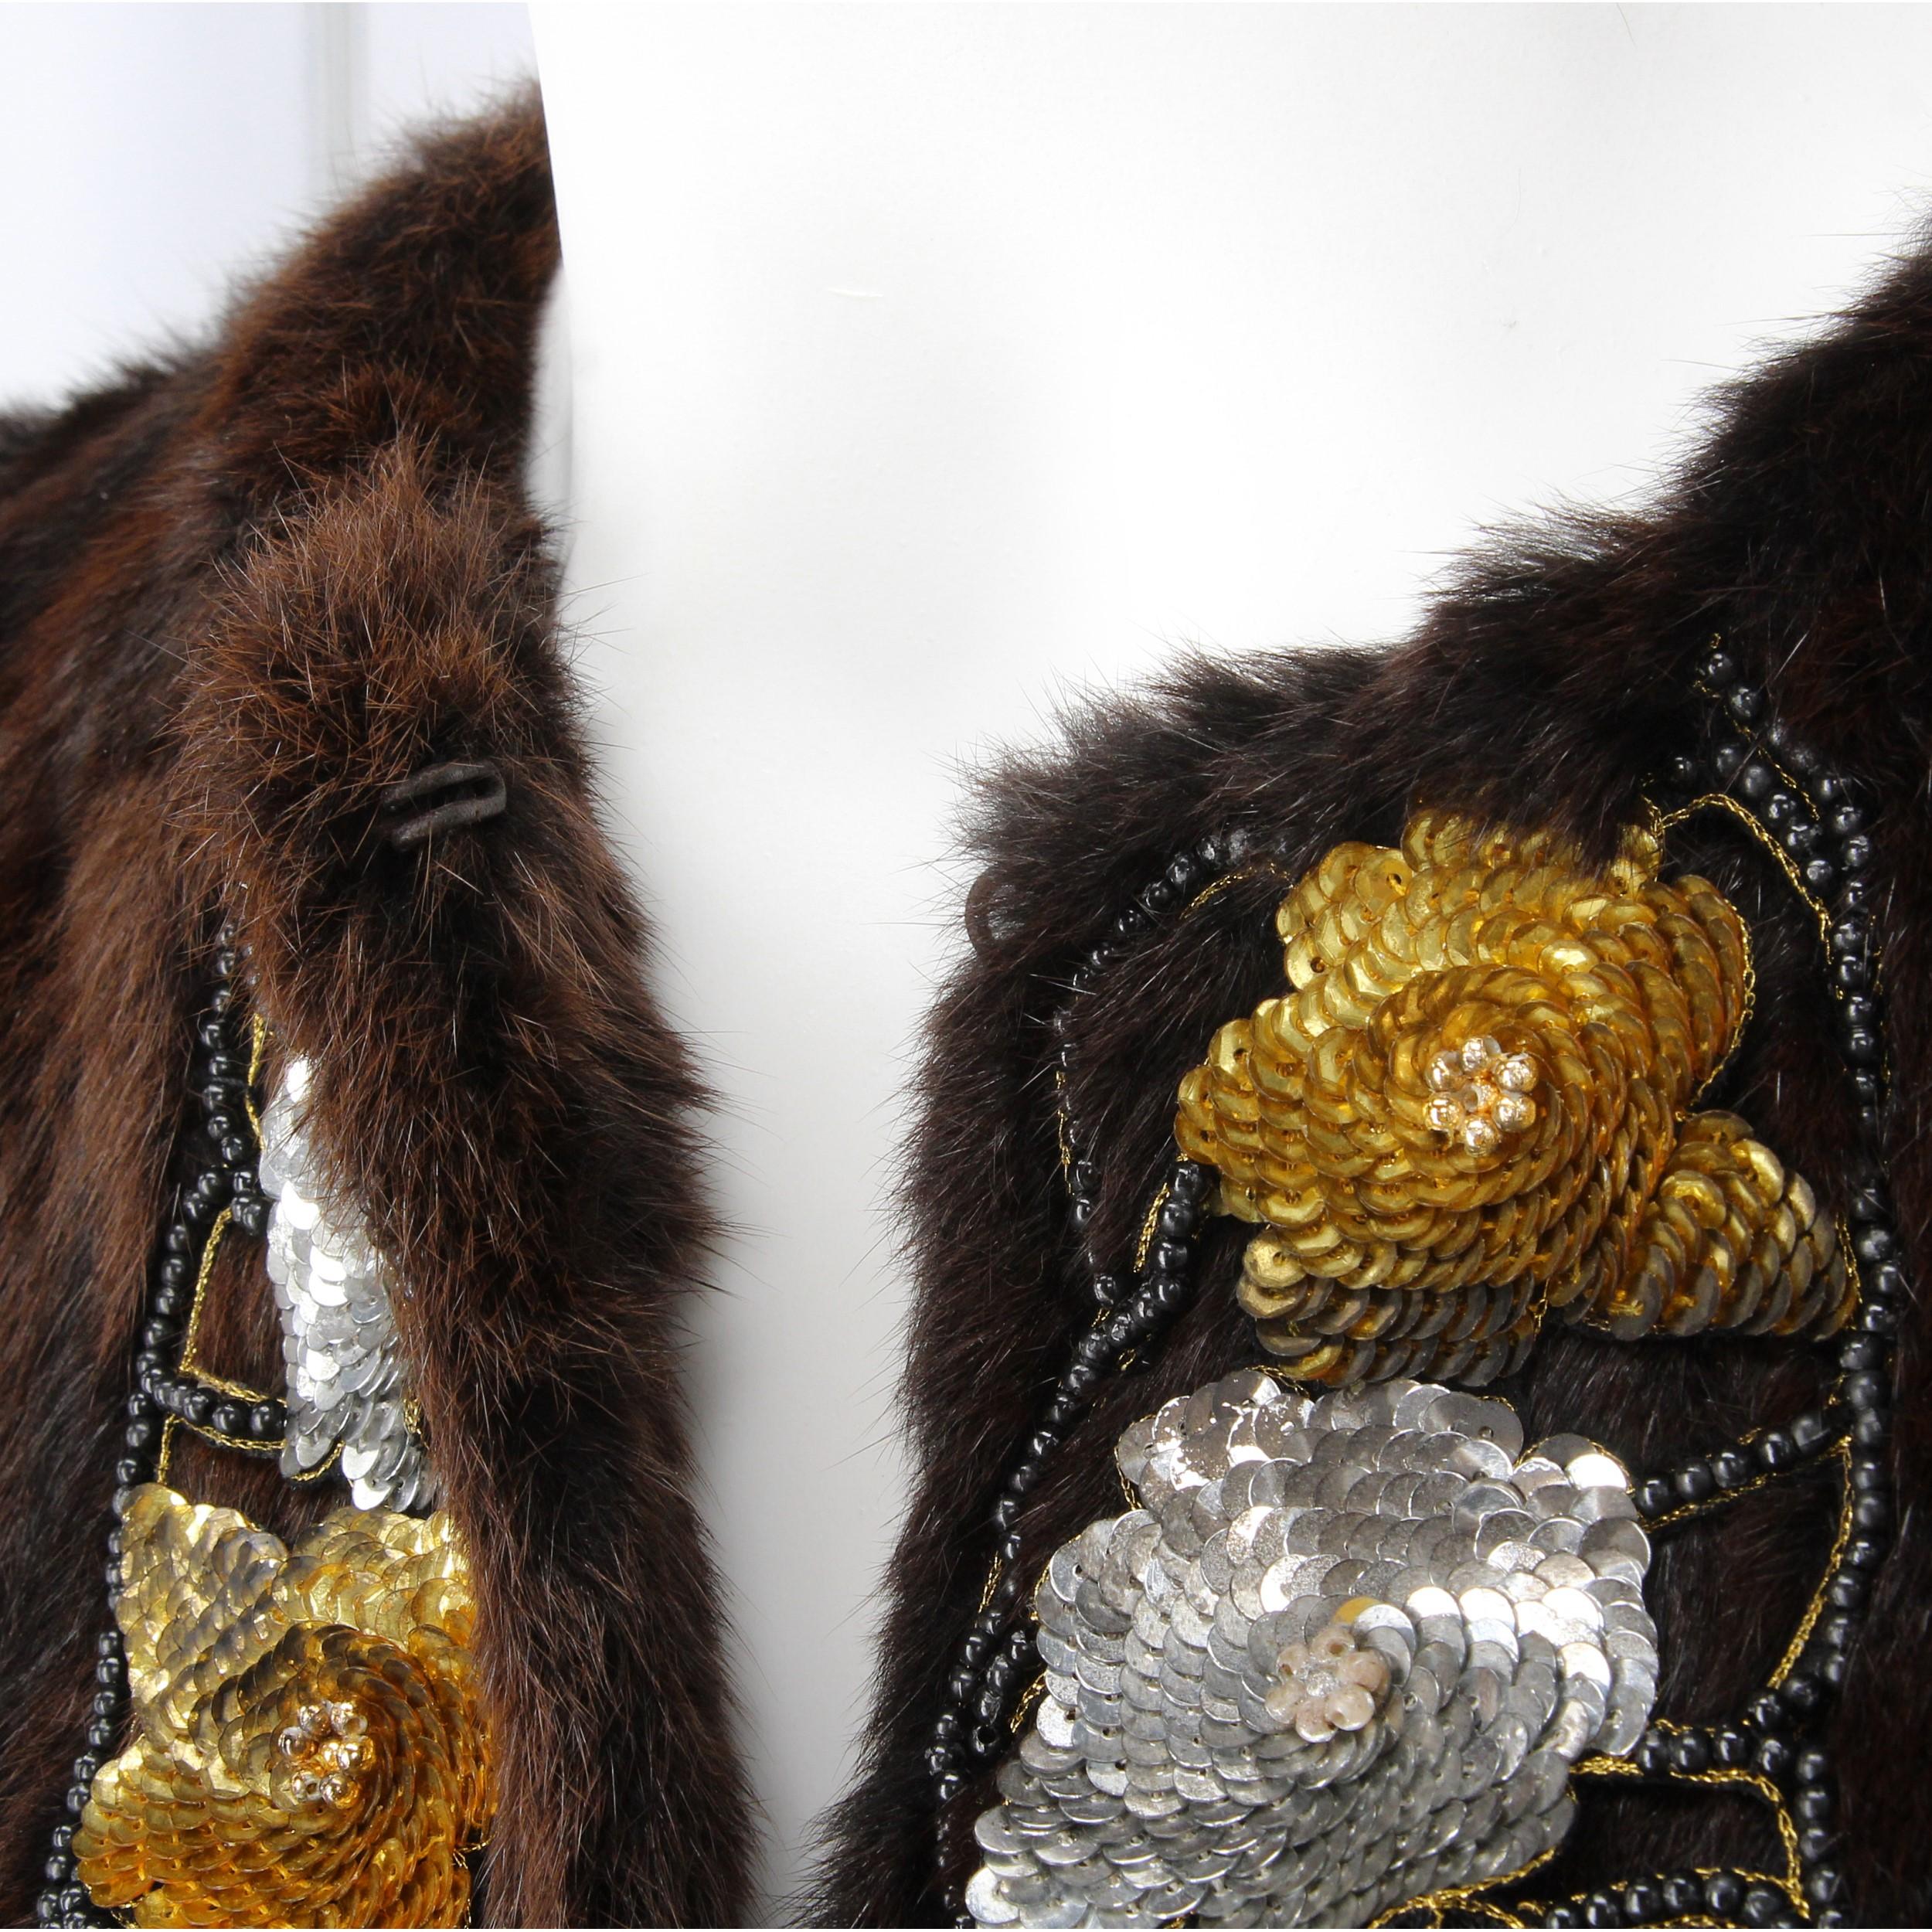 Women's 2000s Miu Miu Brown Hamster Fur Coat with Beads and Sequins floral applications